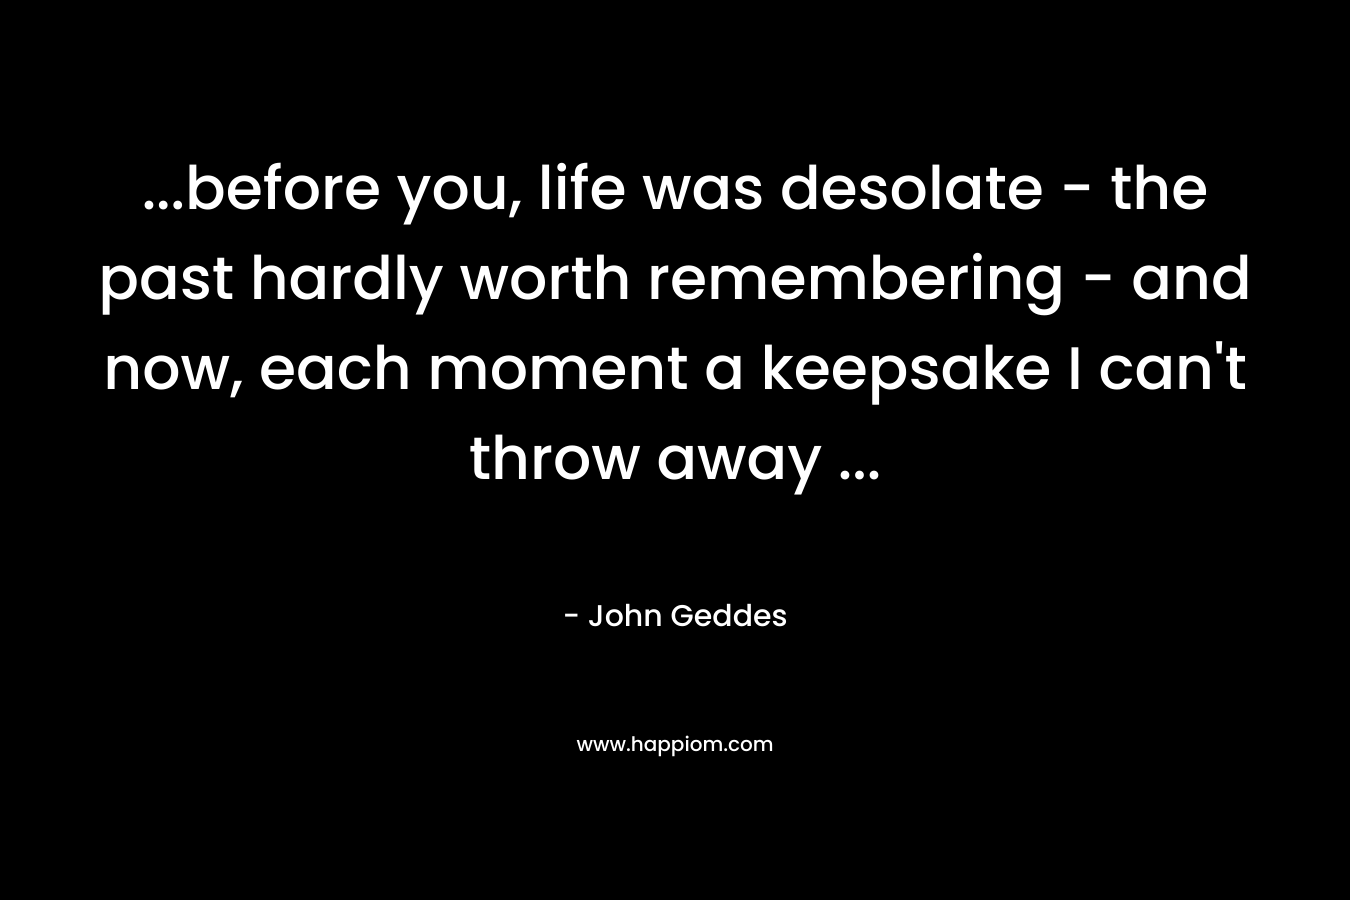 …before you, life was desolate – the past hardly worth remembering – and now, each moment a keepsake I can’t throw away … – John Geddes